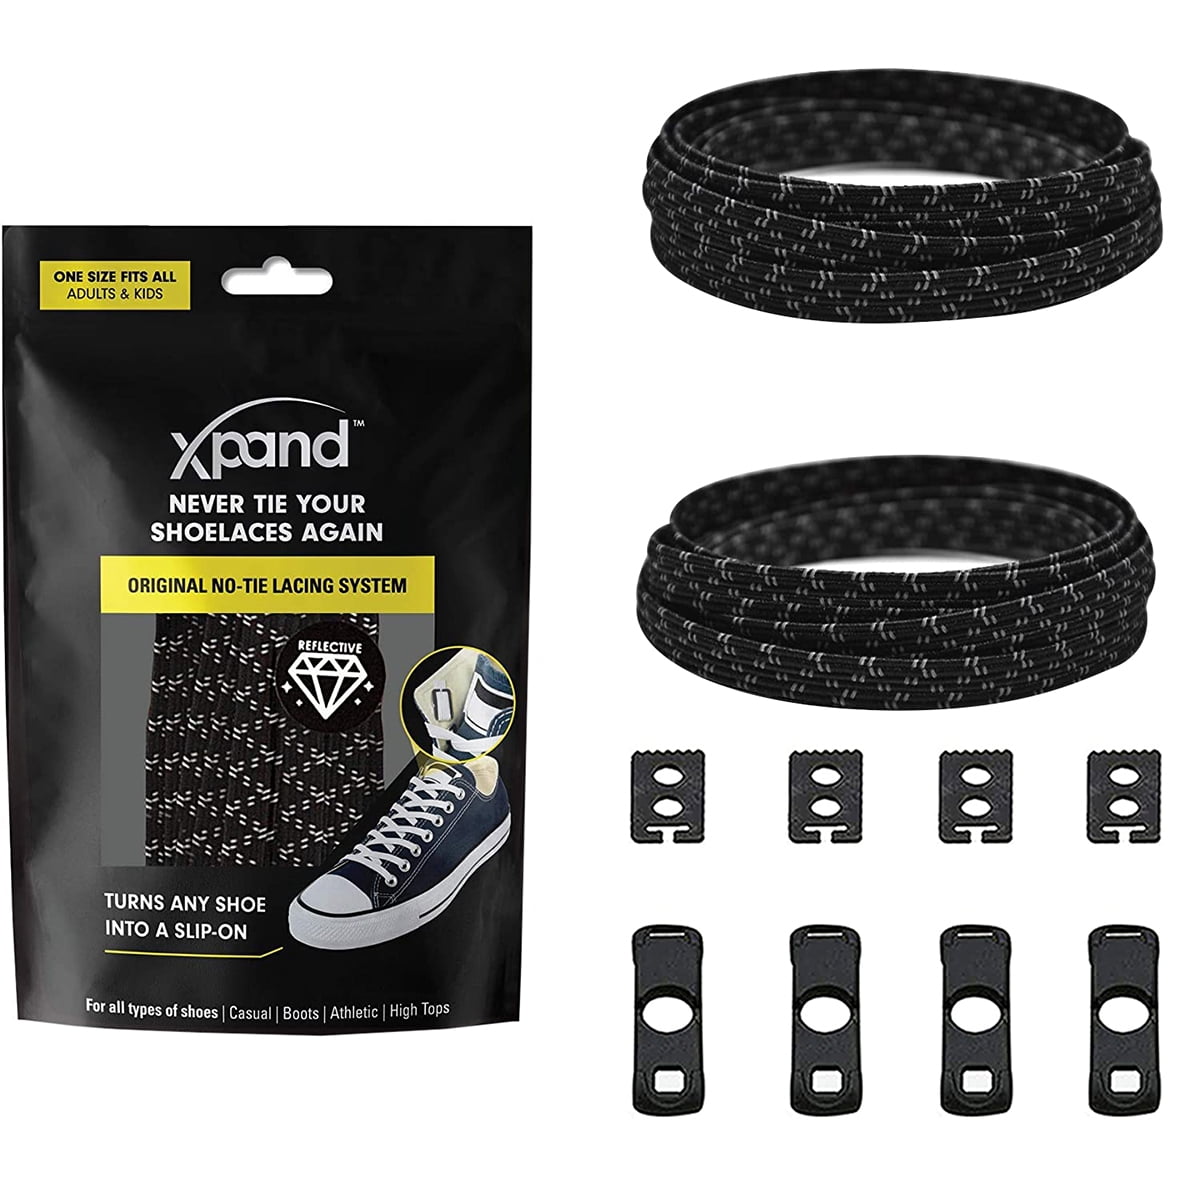 One Size fits ALL Xpand® Original No Tie Elastic Shoe Lace Lacing System 